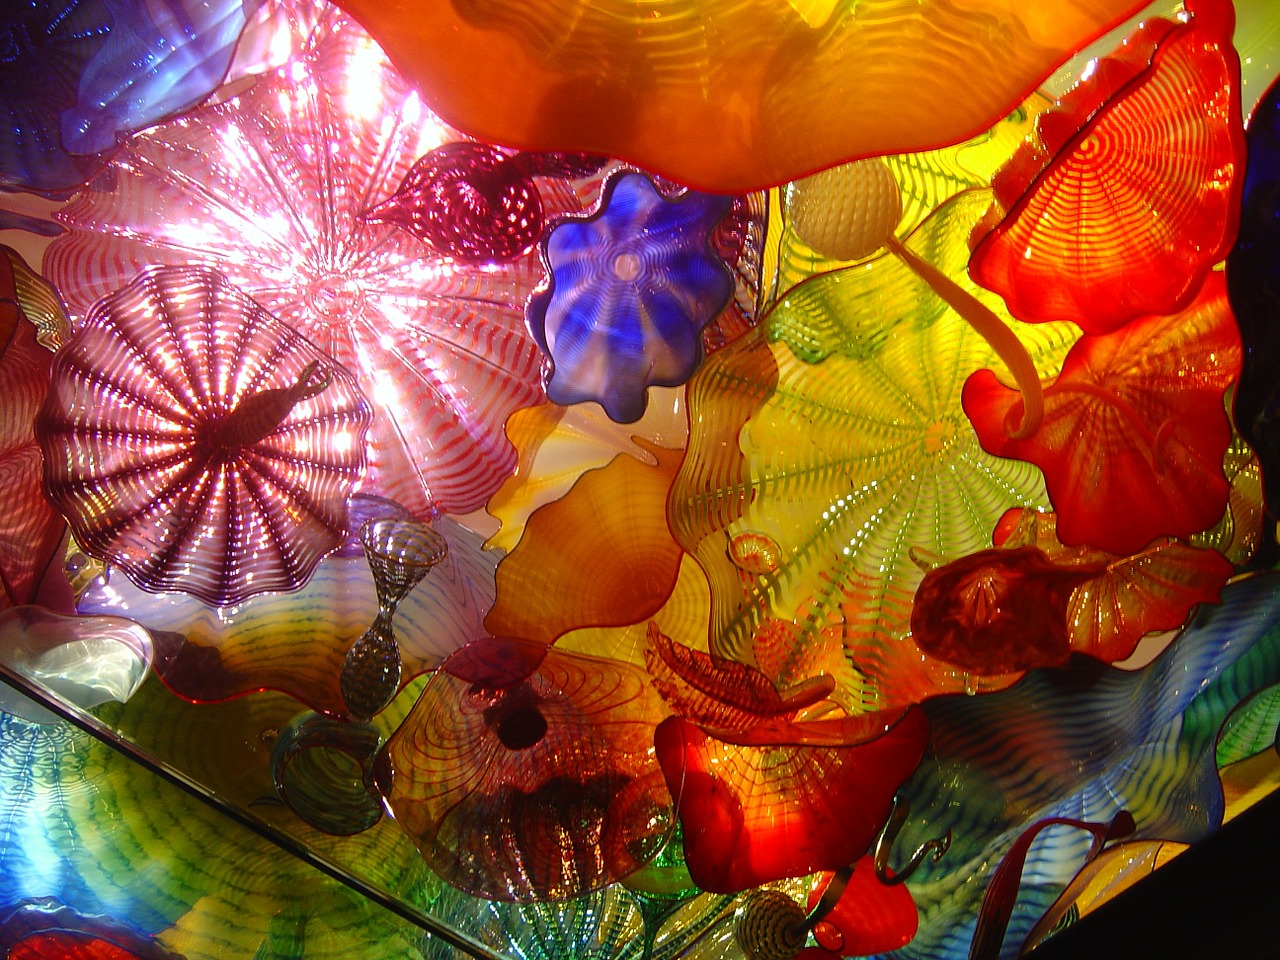 chihuly glass colorful chihuly exhibit free photo